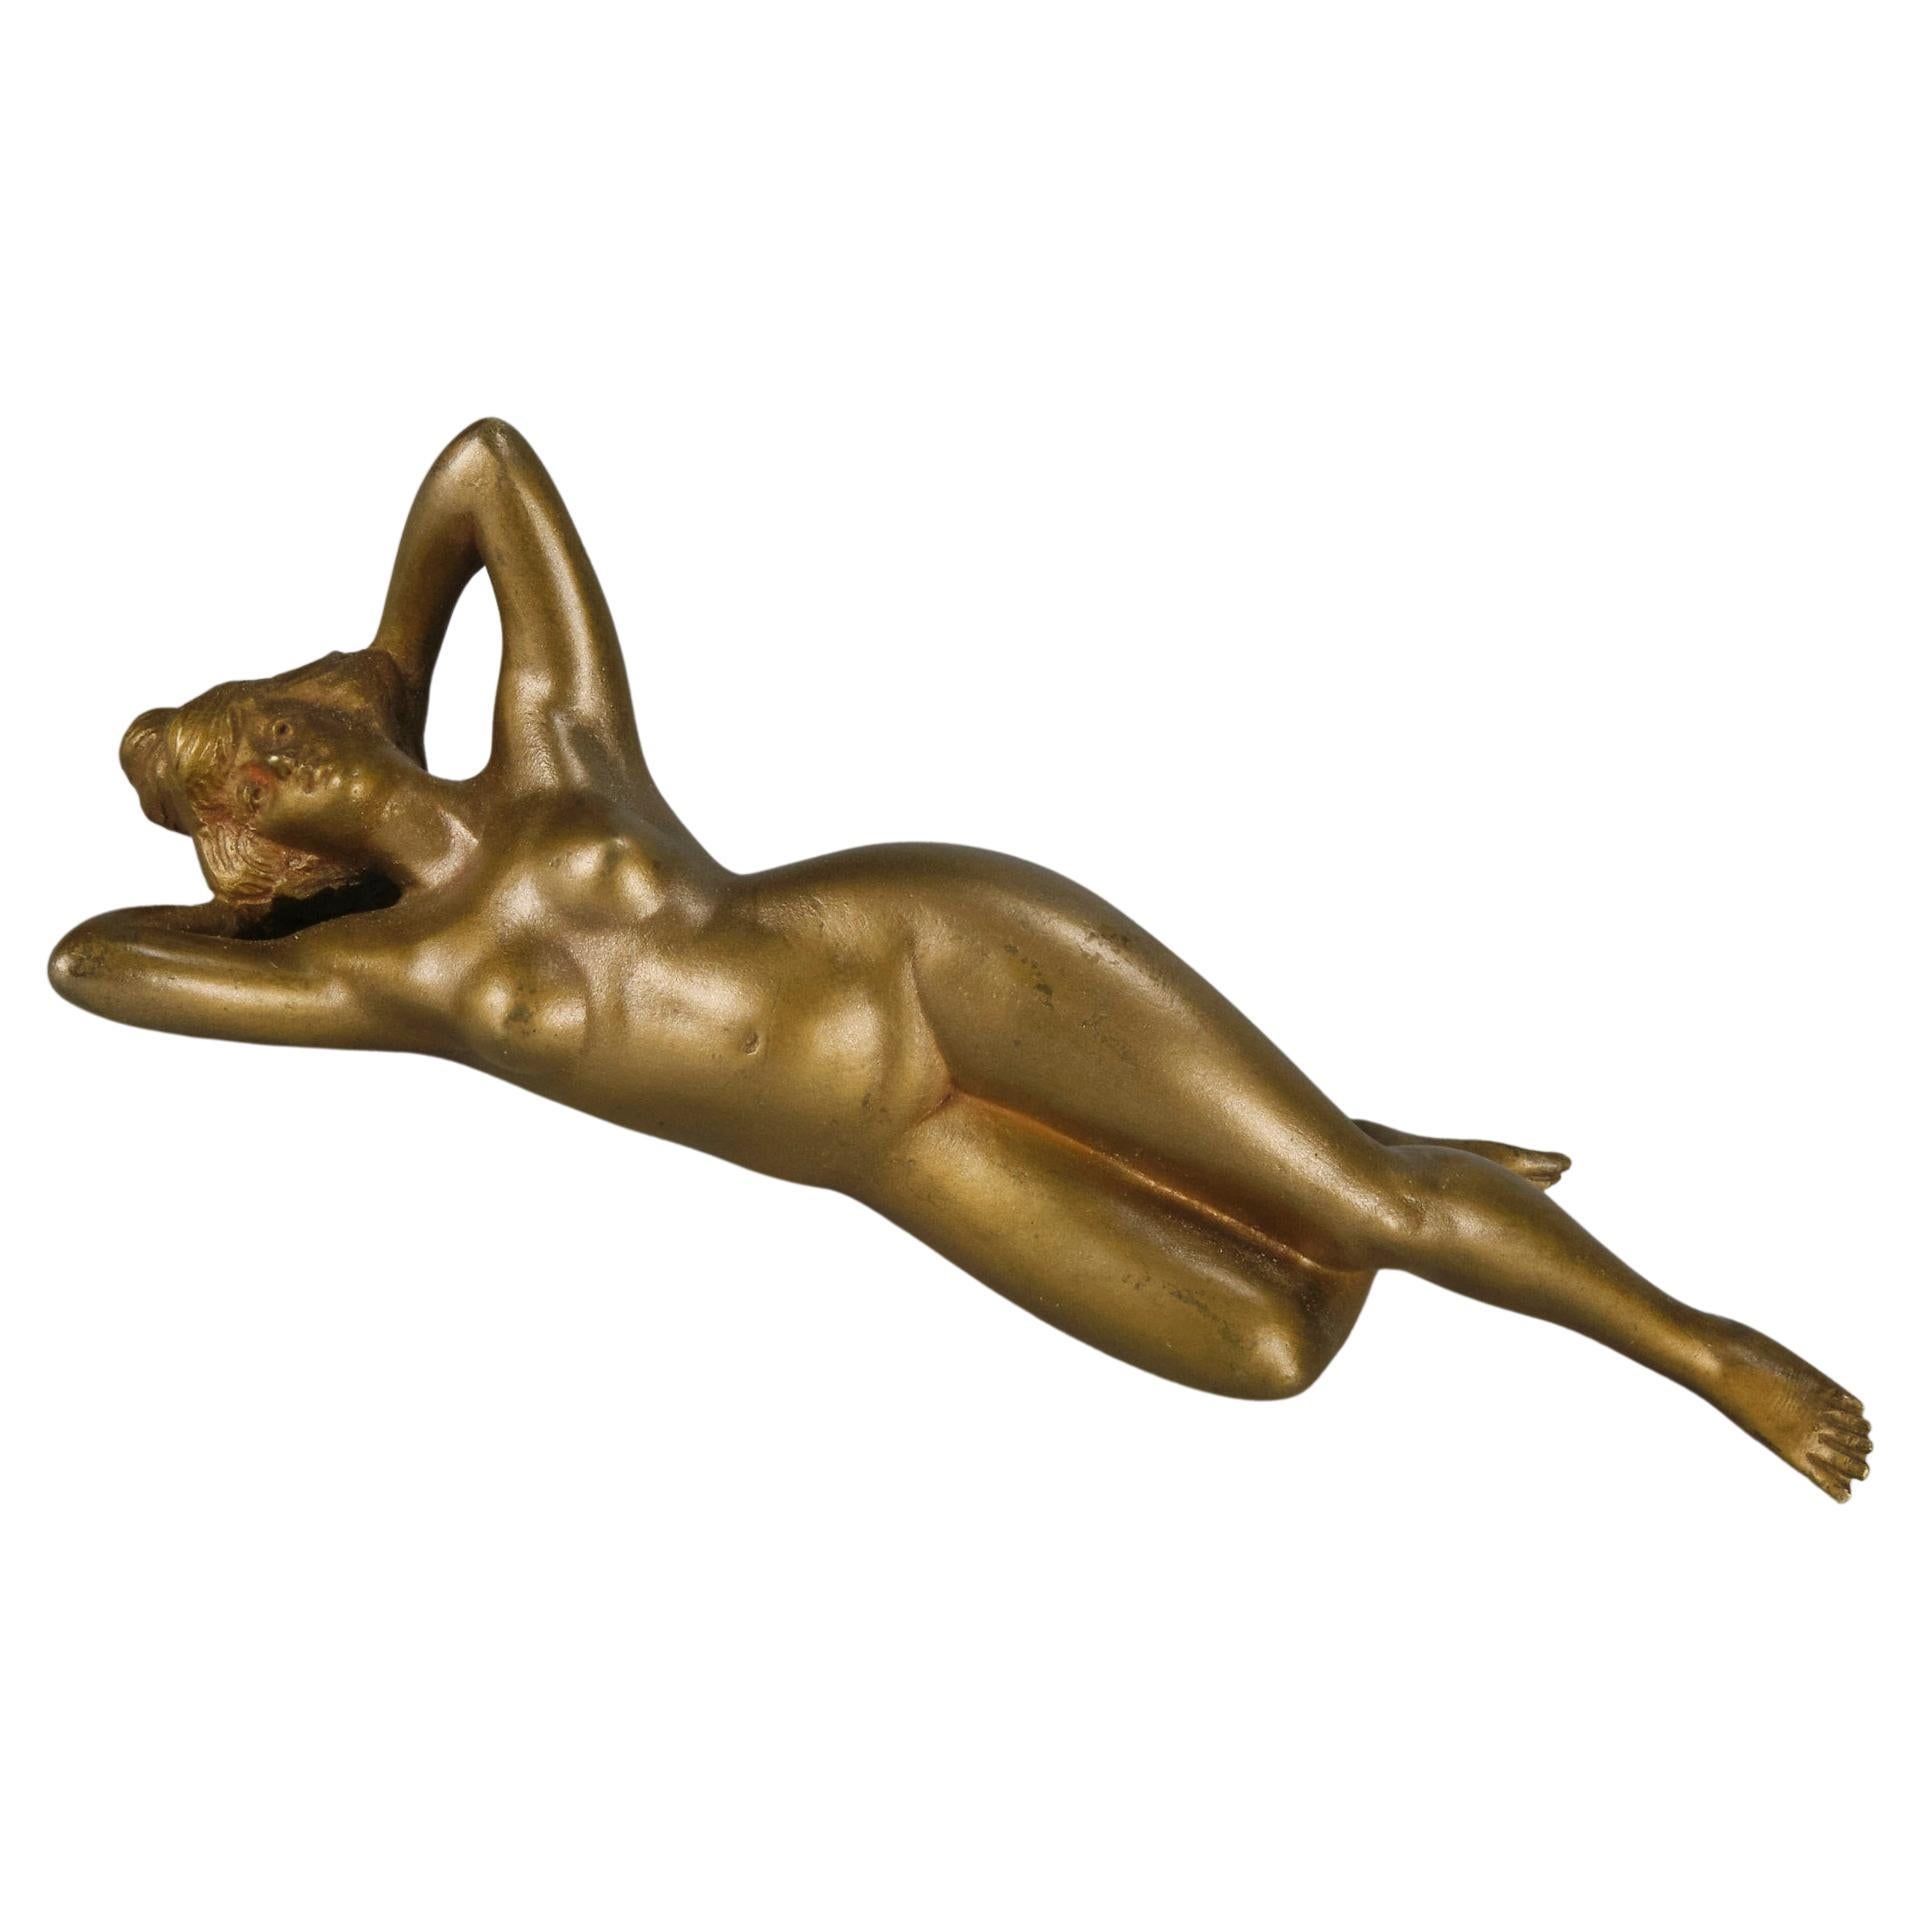 Early 20th Century Cold-Painted Bronze "Reclining Beauty" by Franz Bergman